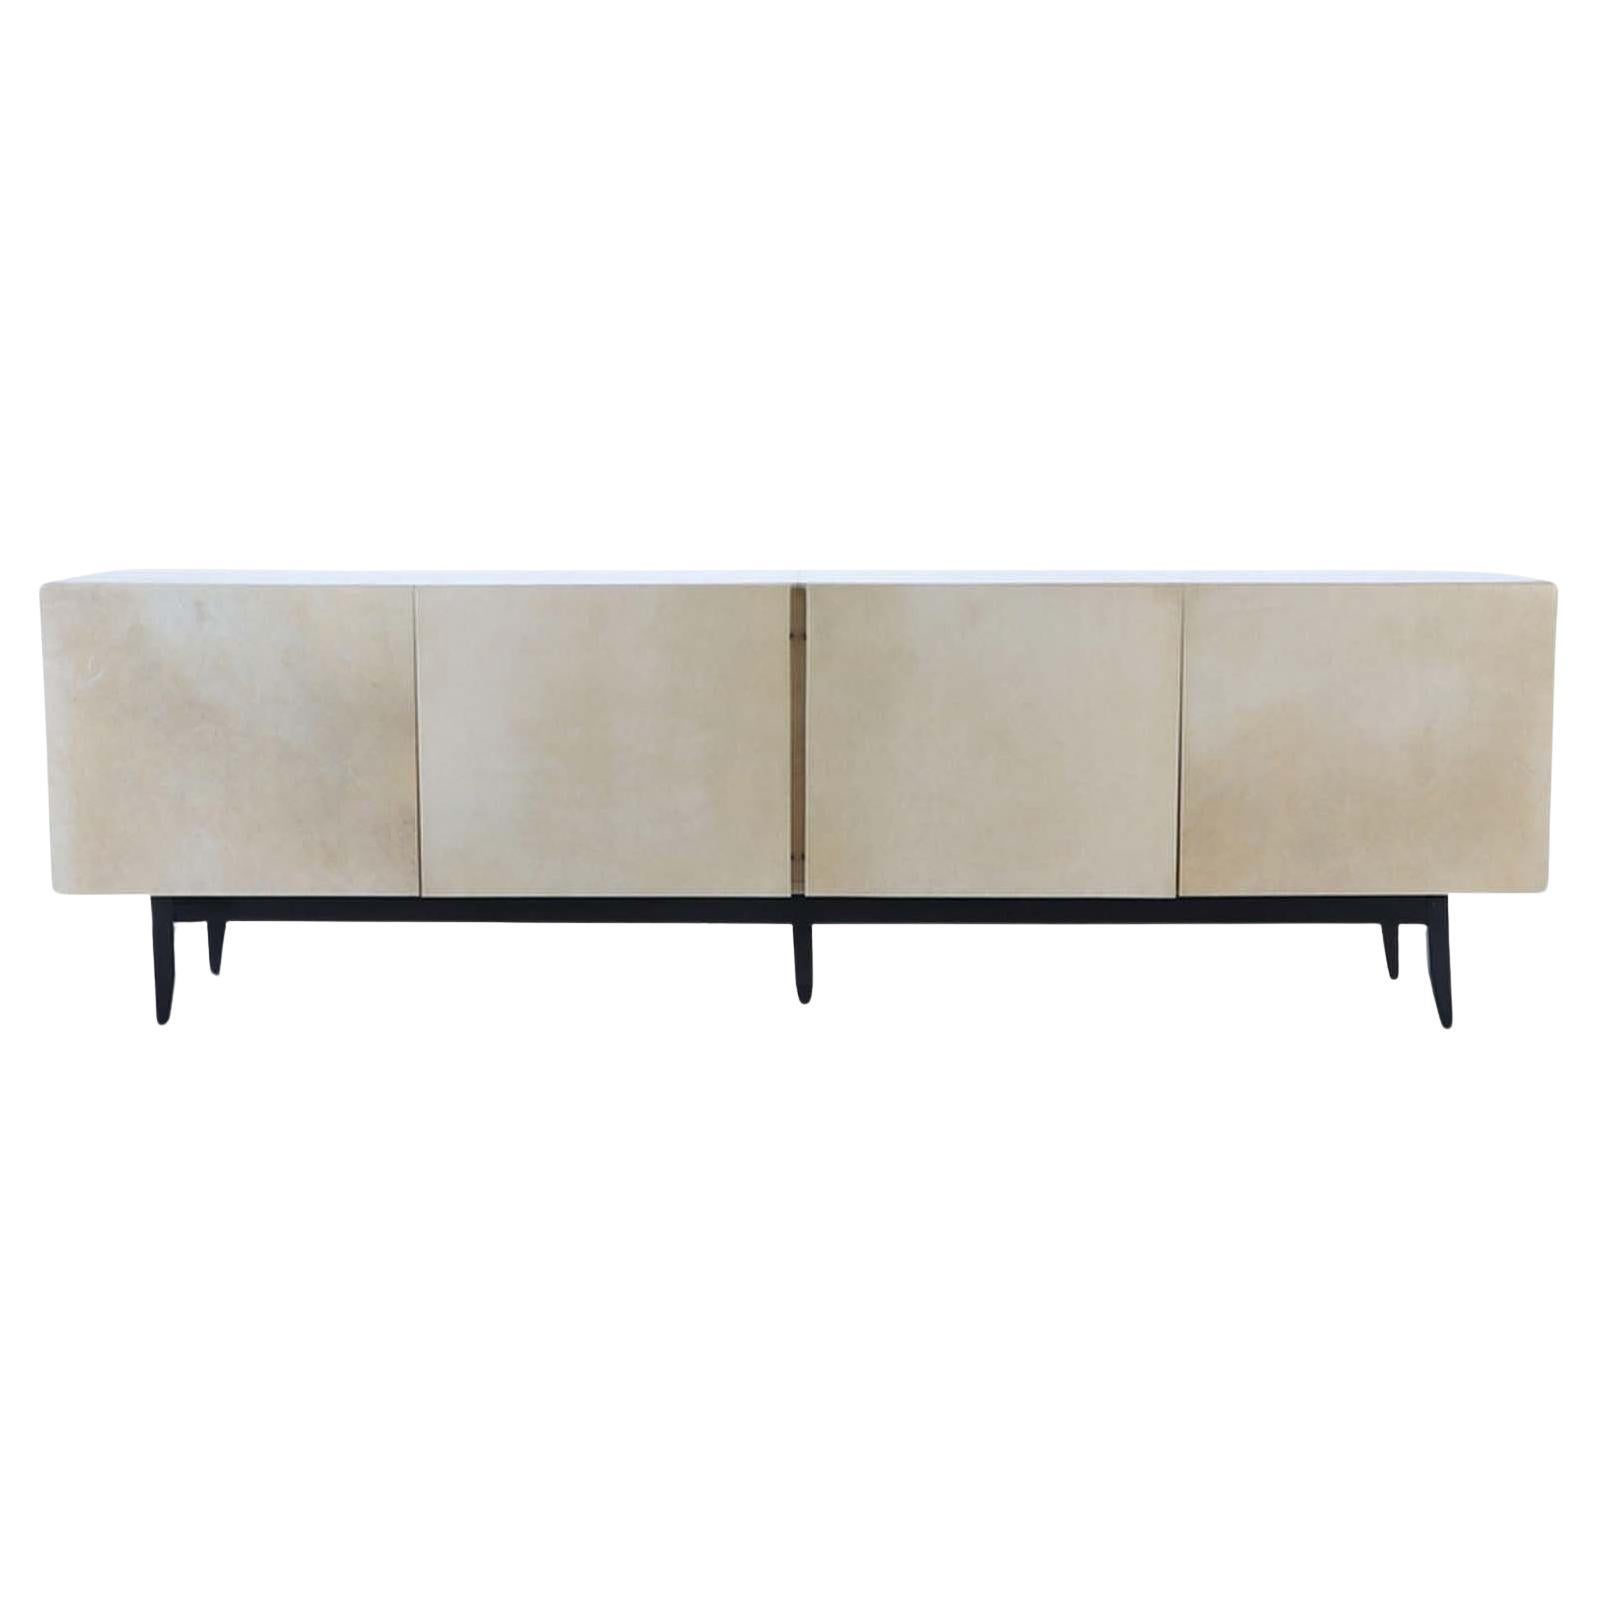 Mid-Century Sideboard in Parchment with Ebonized Base, c. 1960's For Sale